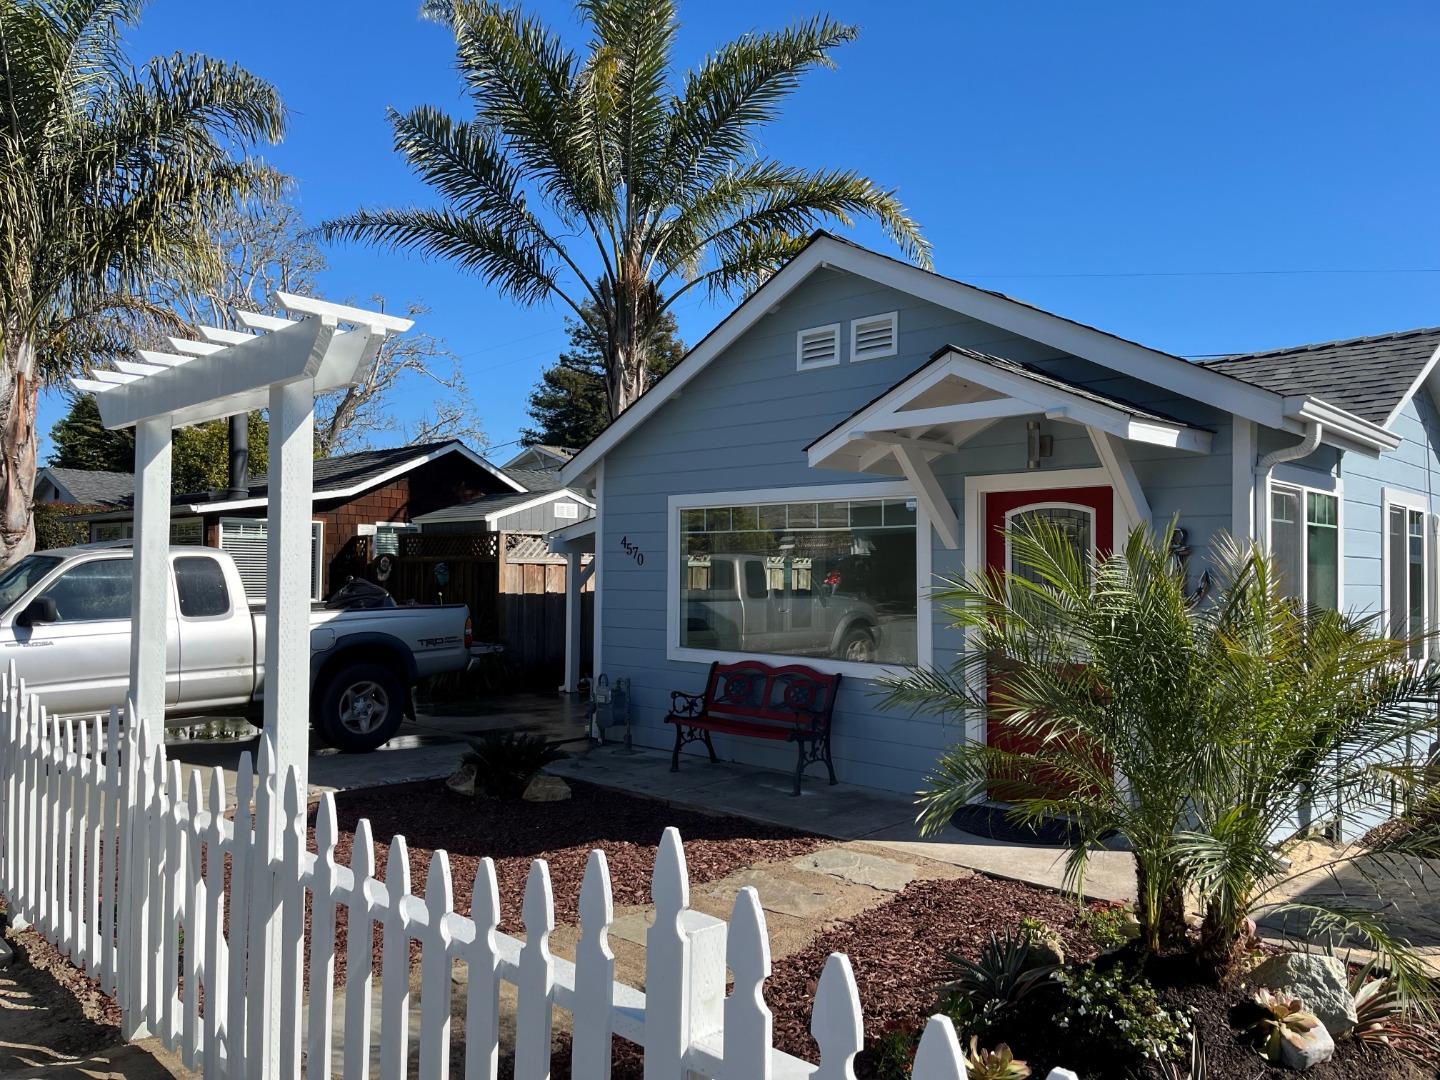 Photo of 4570 Crystal St in Capitola, CA